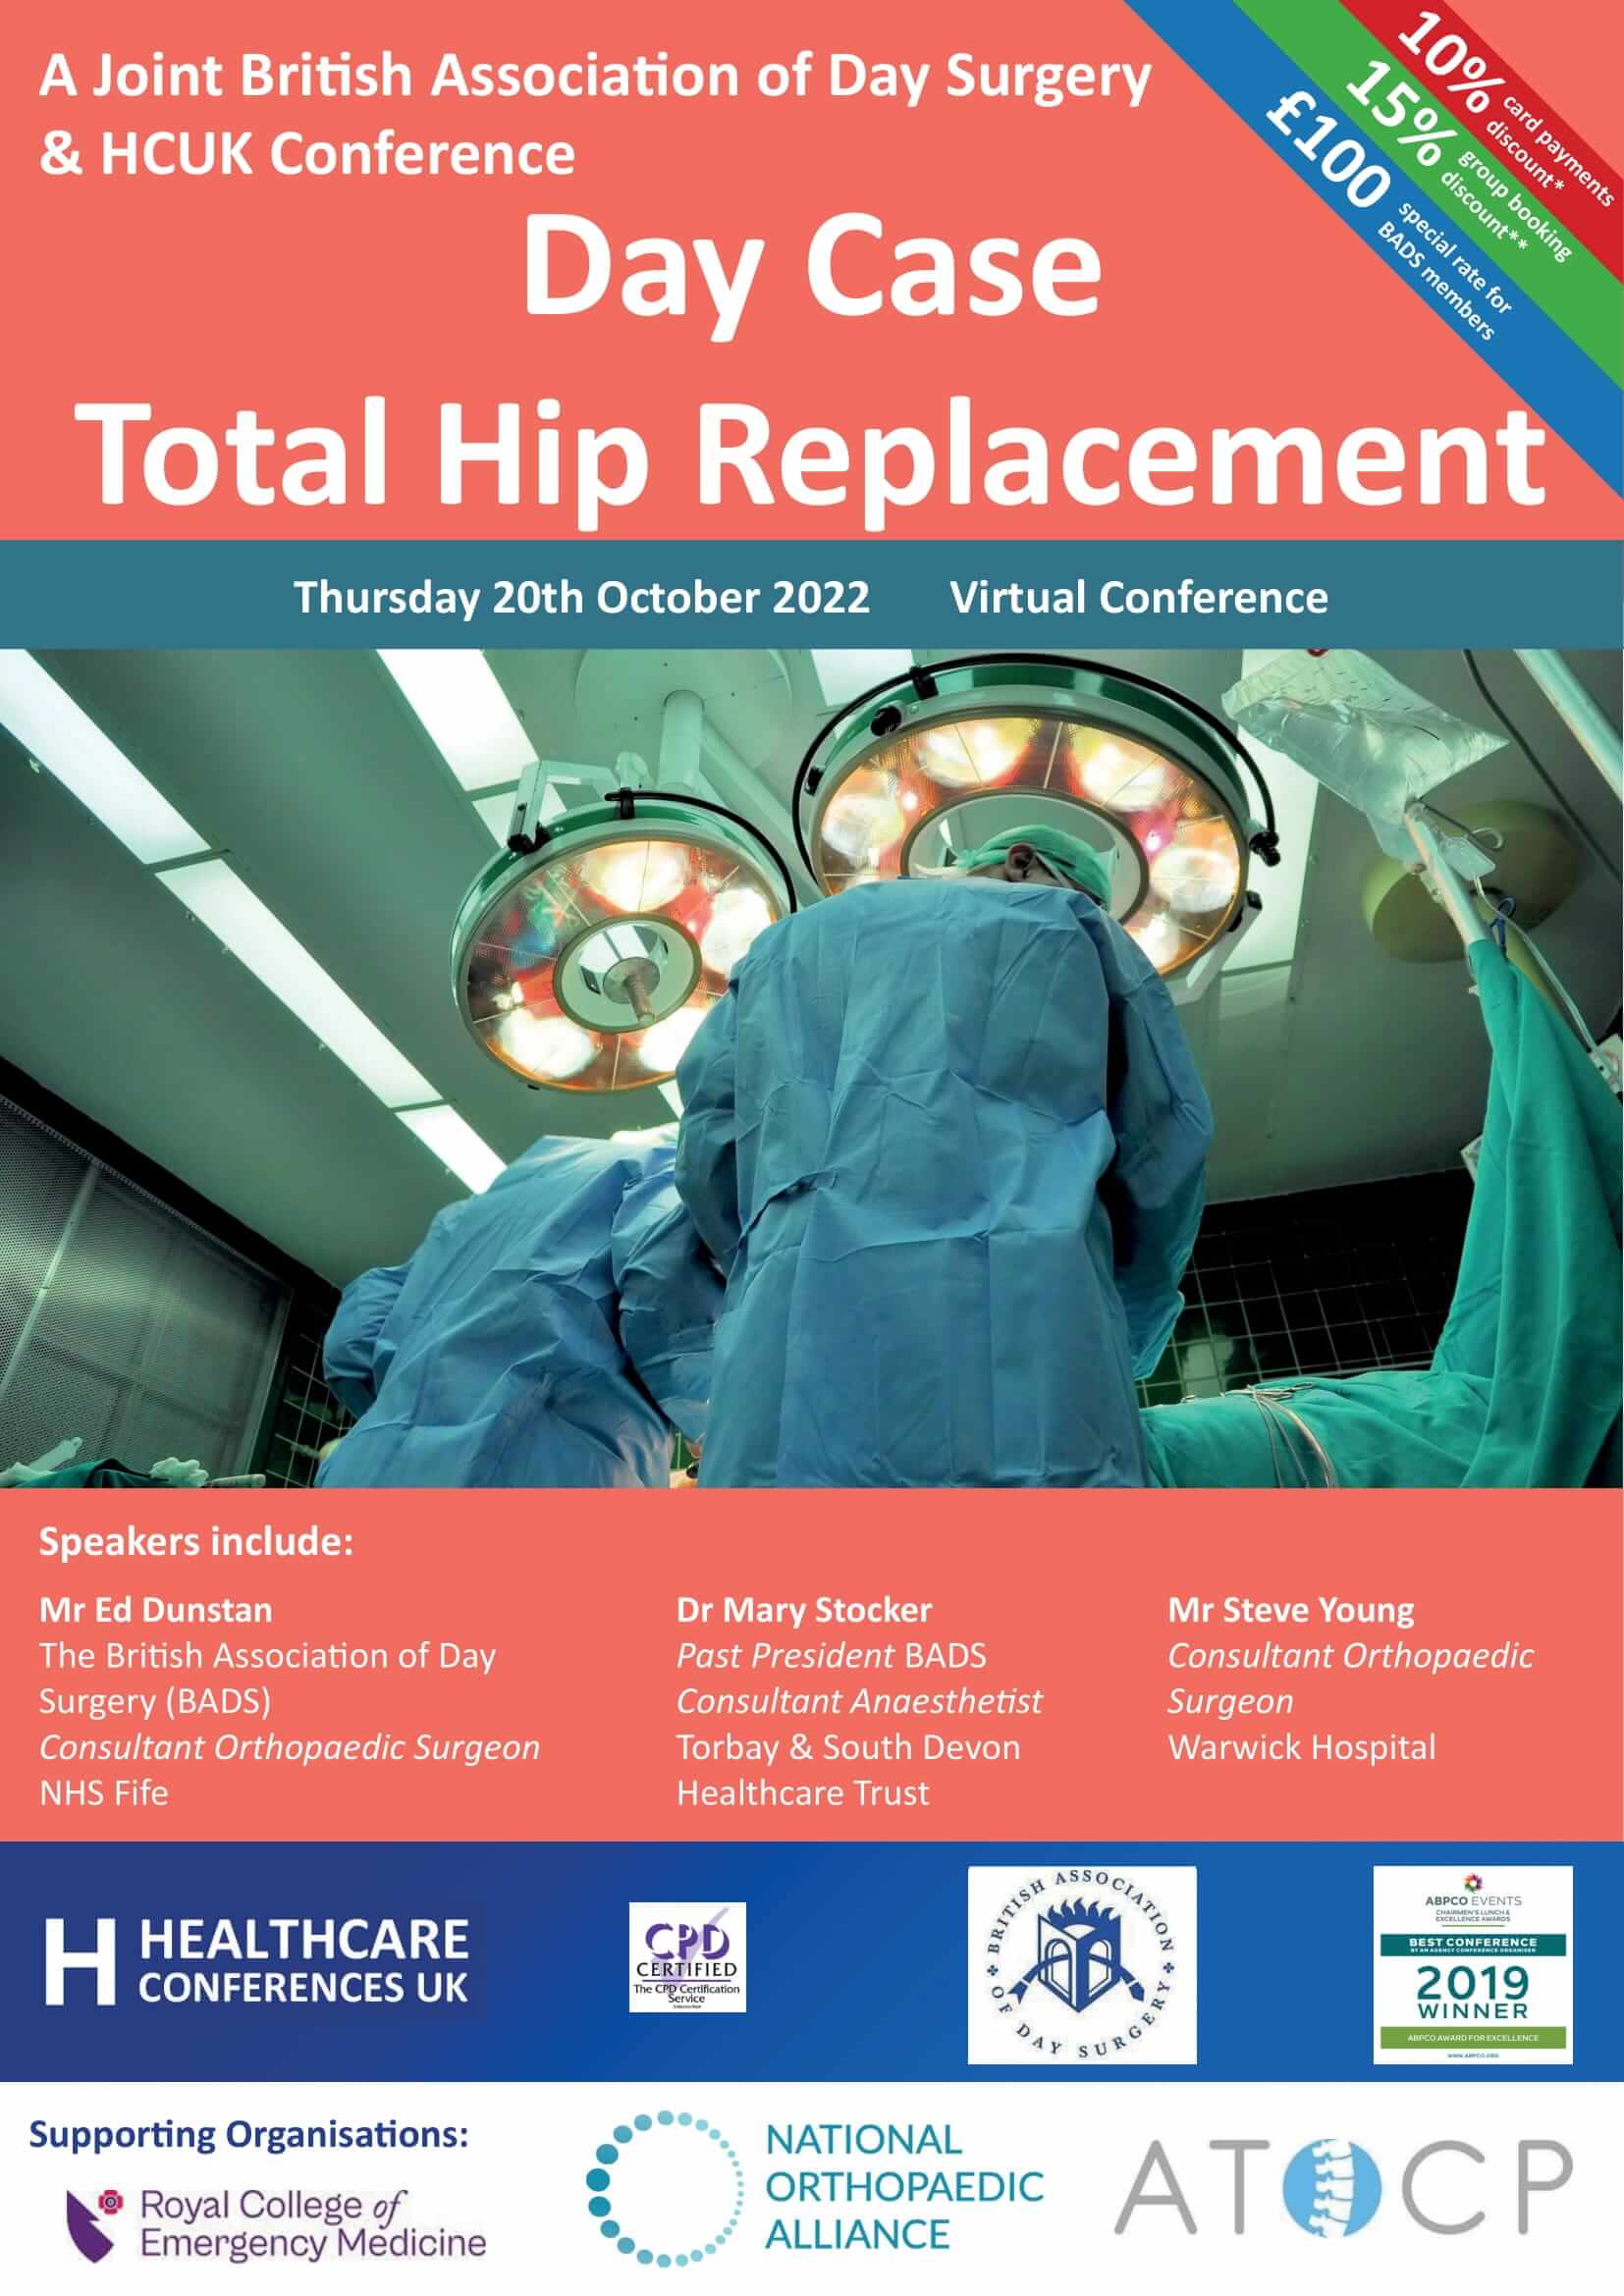 Day Case Total Hip Replacement